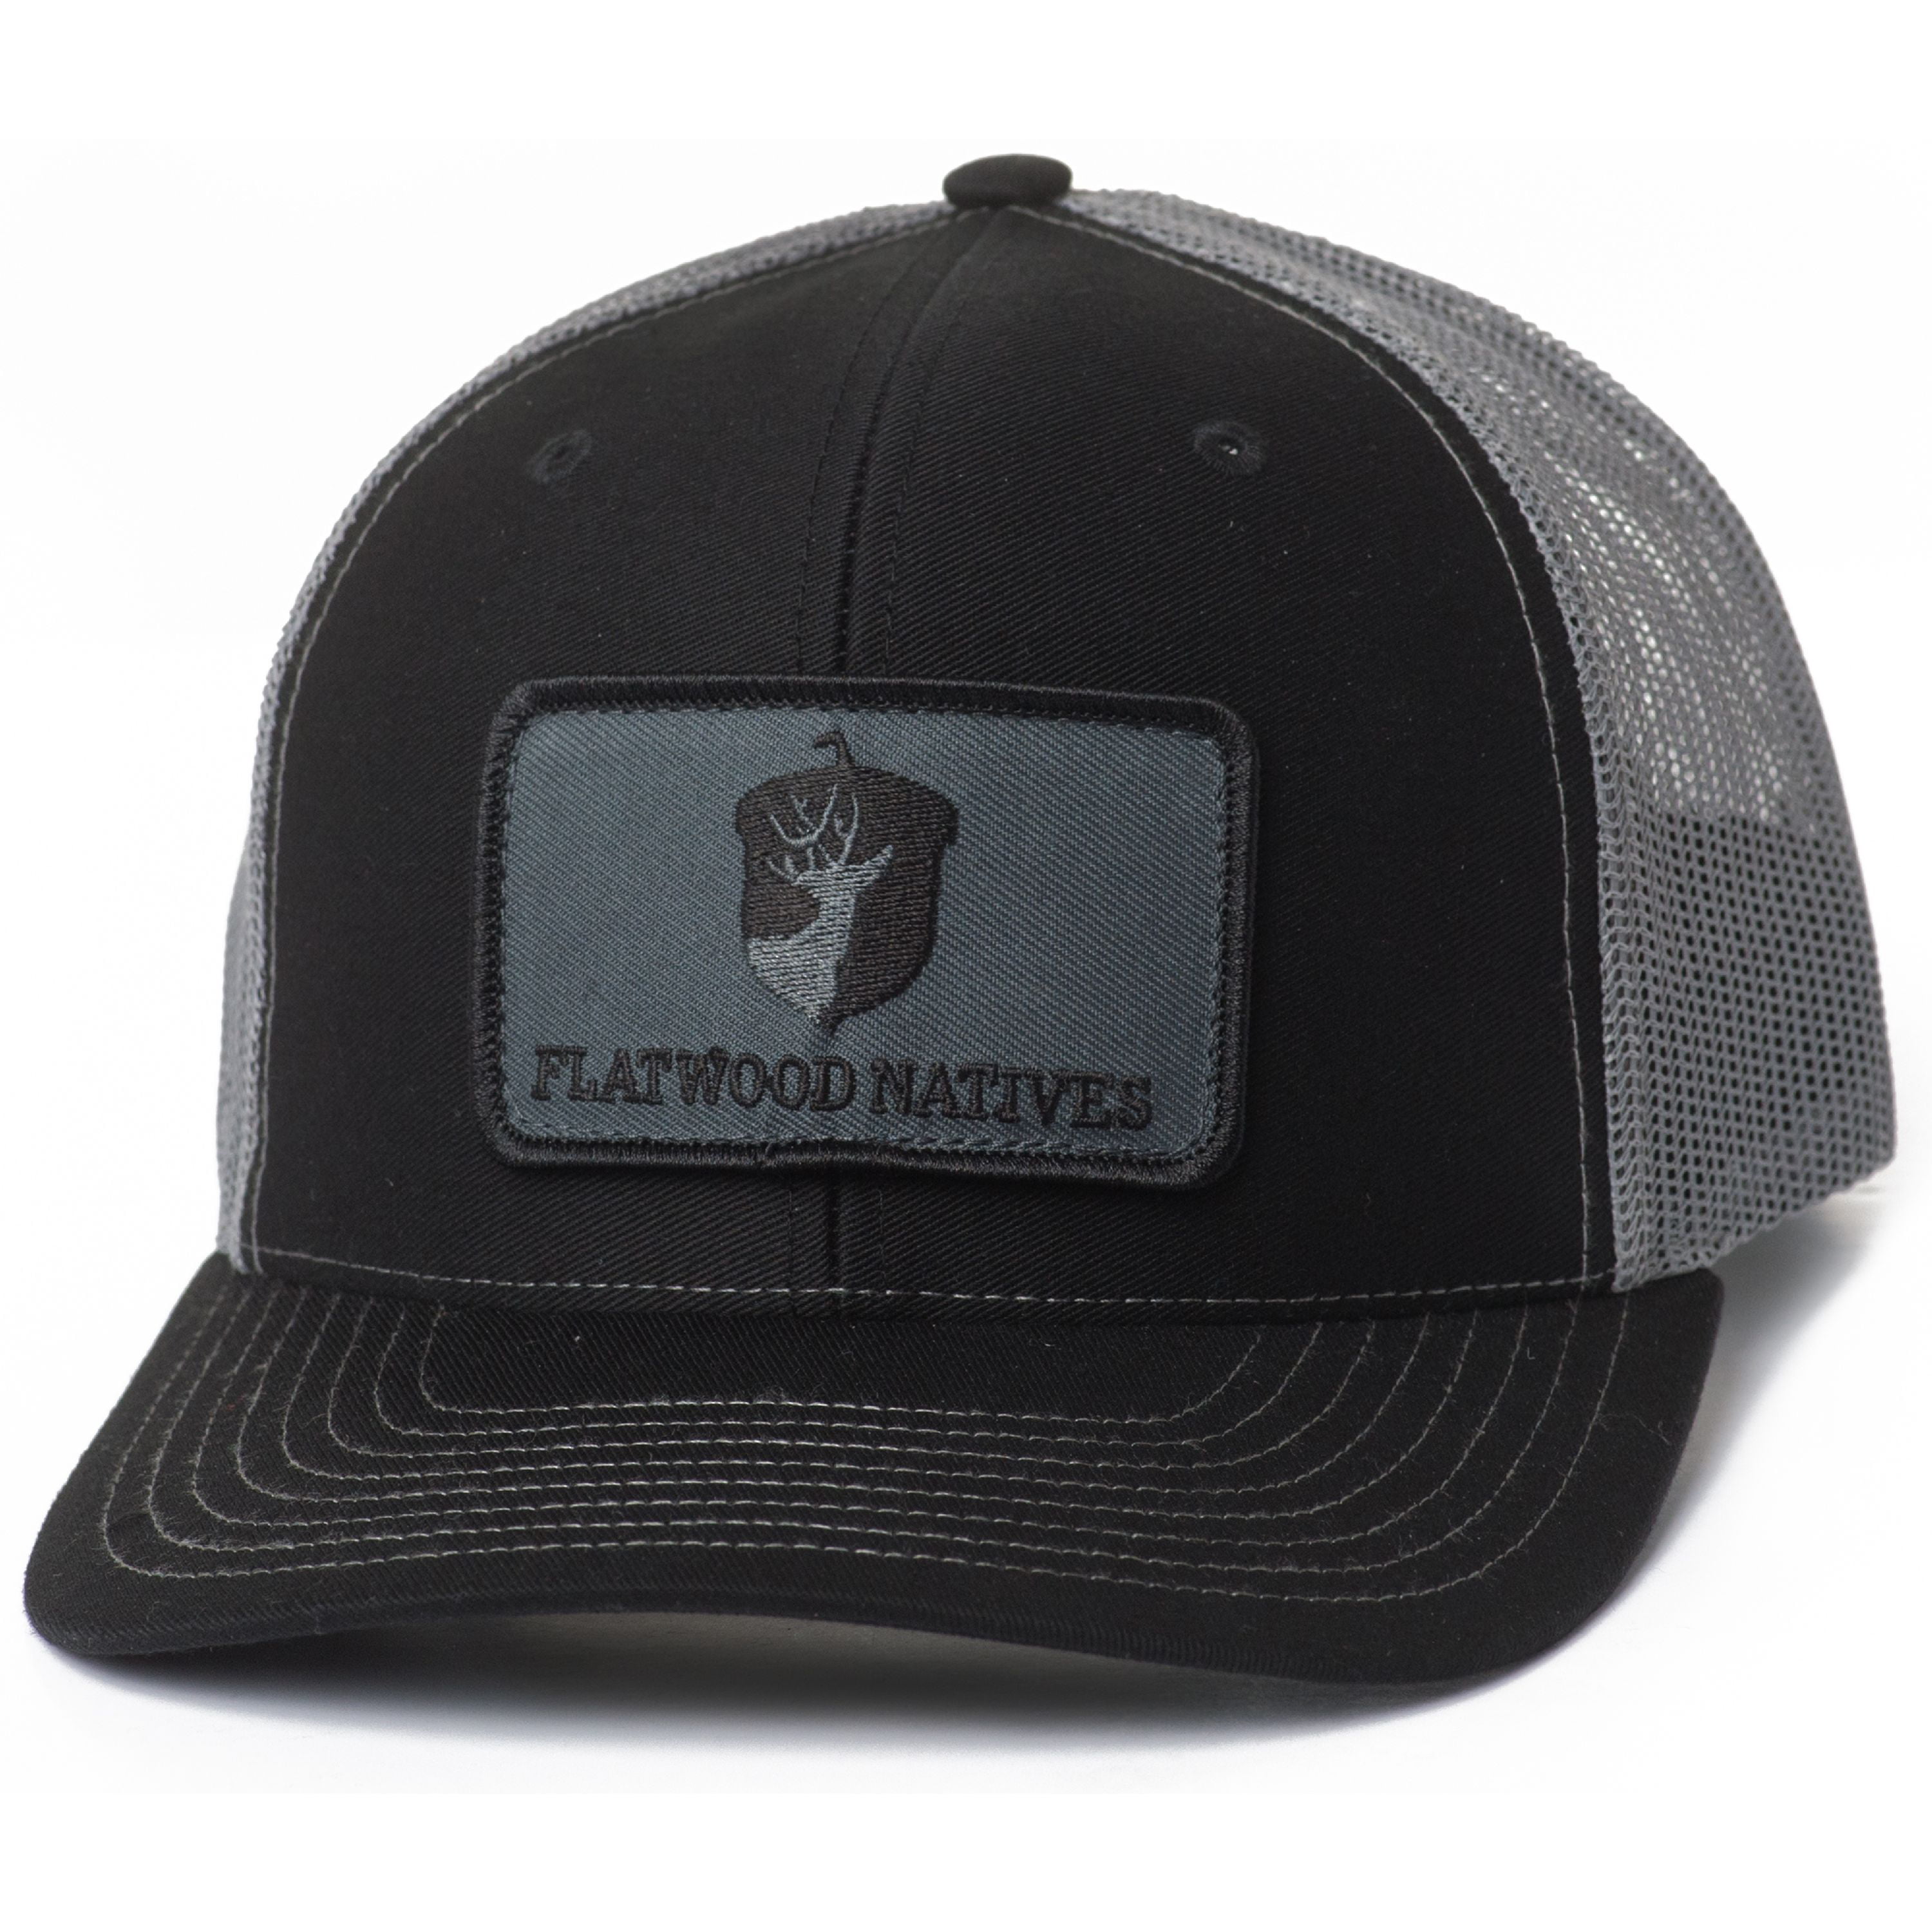 Flatwood Natives Black and Gray Full Logo Patch Trucker Style Hat ...